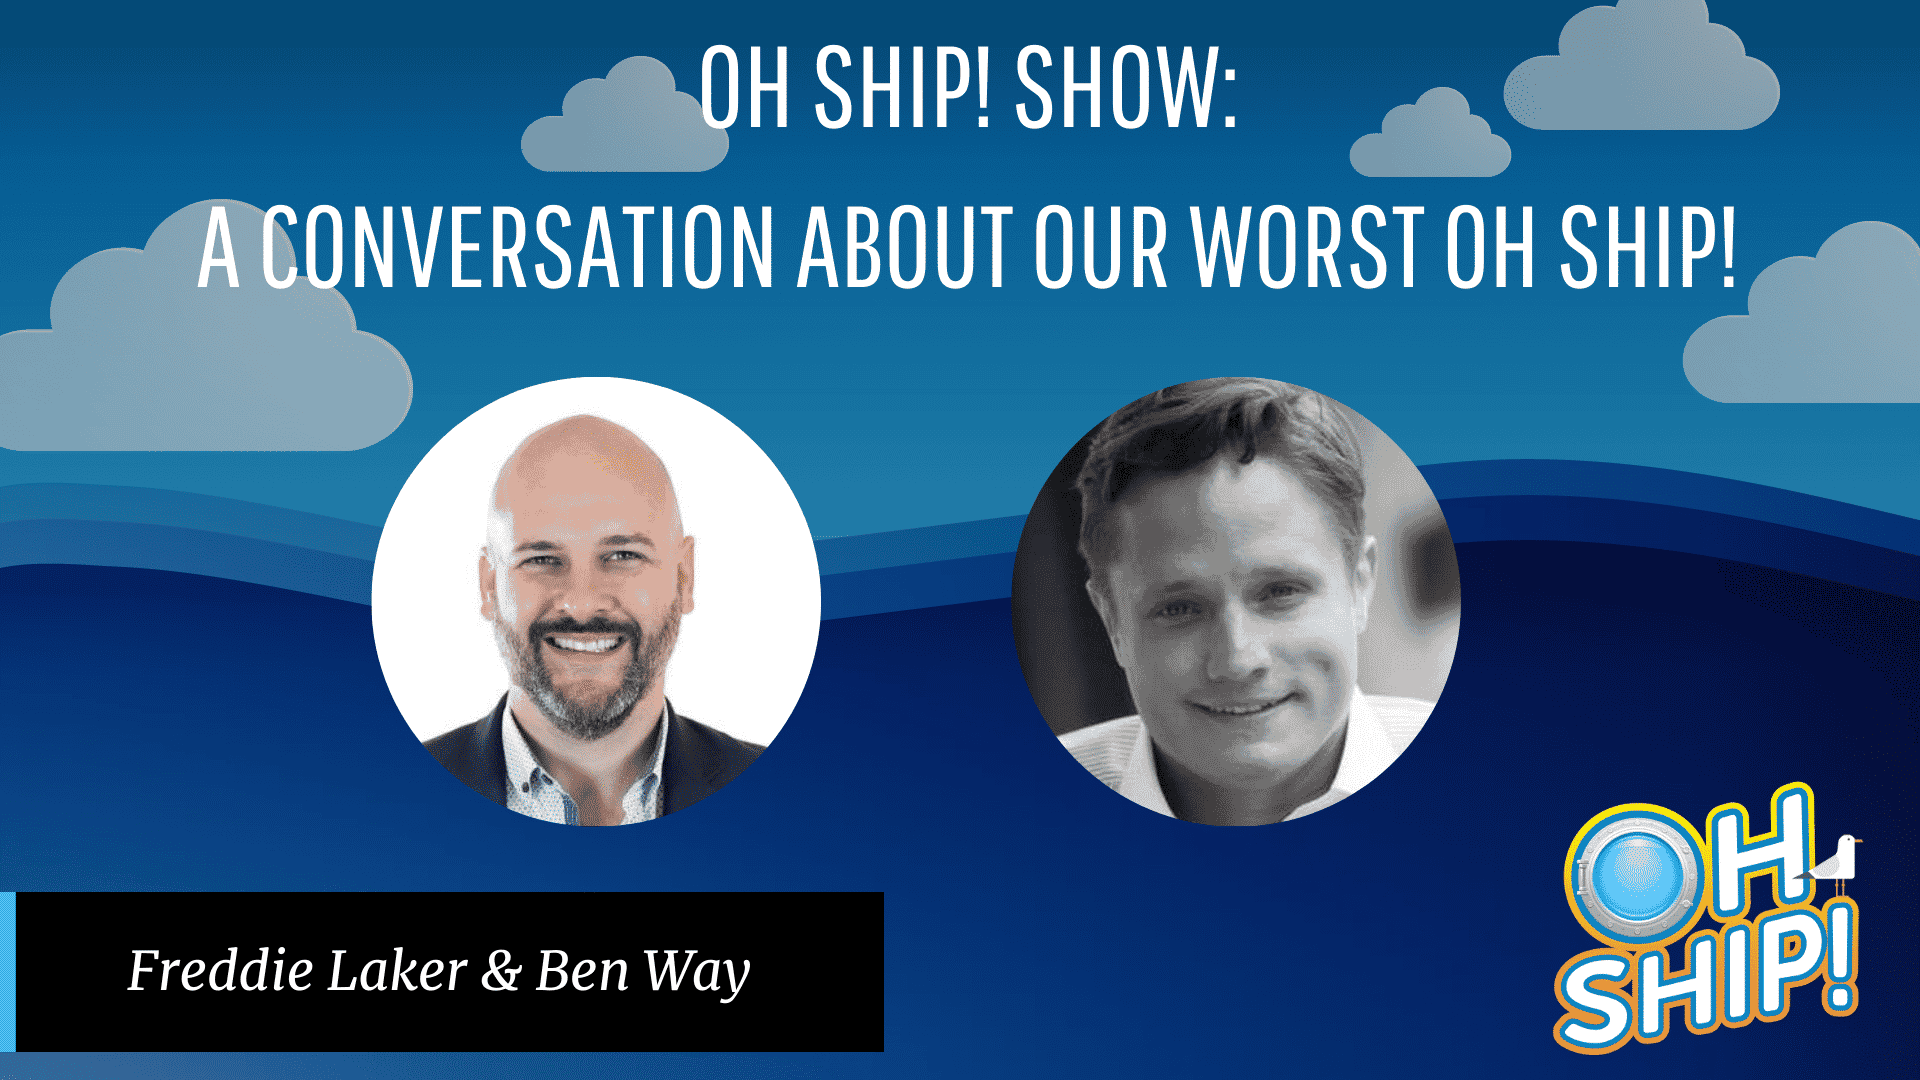 An image promoting the "Oh Ship! Show: A Conversation About Our Worst Moments" featuring two headshots. The left headshot shows a bald man with a beard smiling and the right headshot shows a man with short hair smiling. Text below reads "Freddie Laker & Ben Way." The background is a blue sky with clouds and the "OH SHIP!" logo is at the bottom right